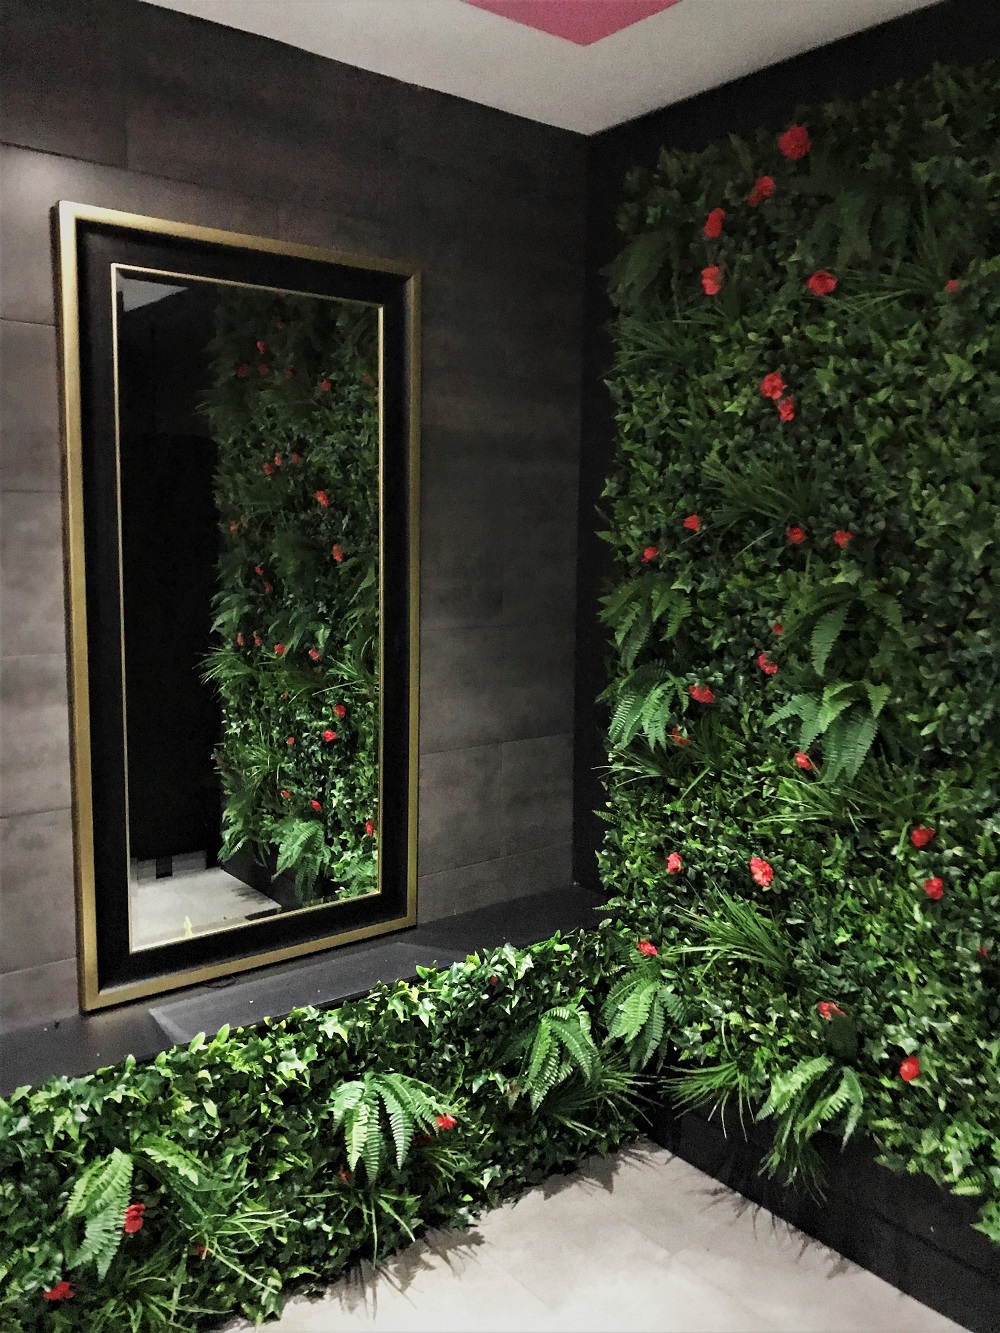 green floral wall display by leaflike at Rozu restaurant